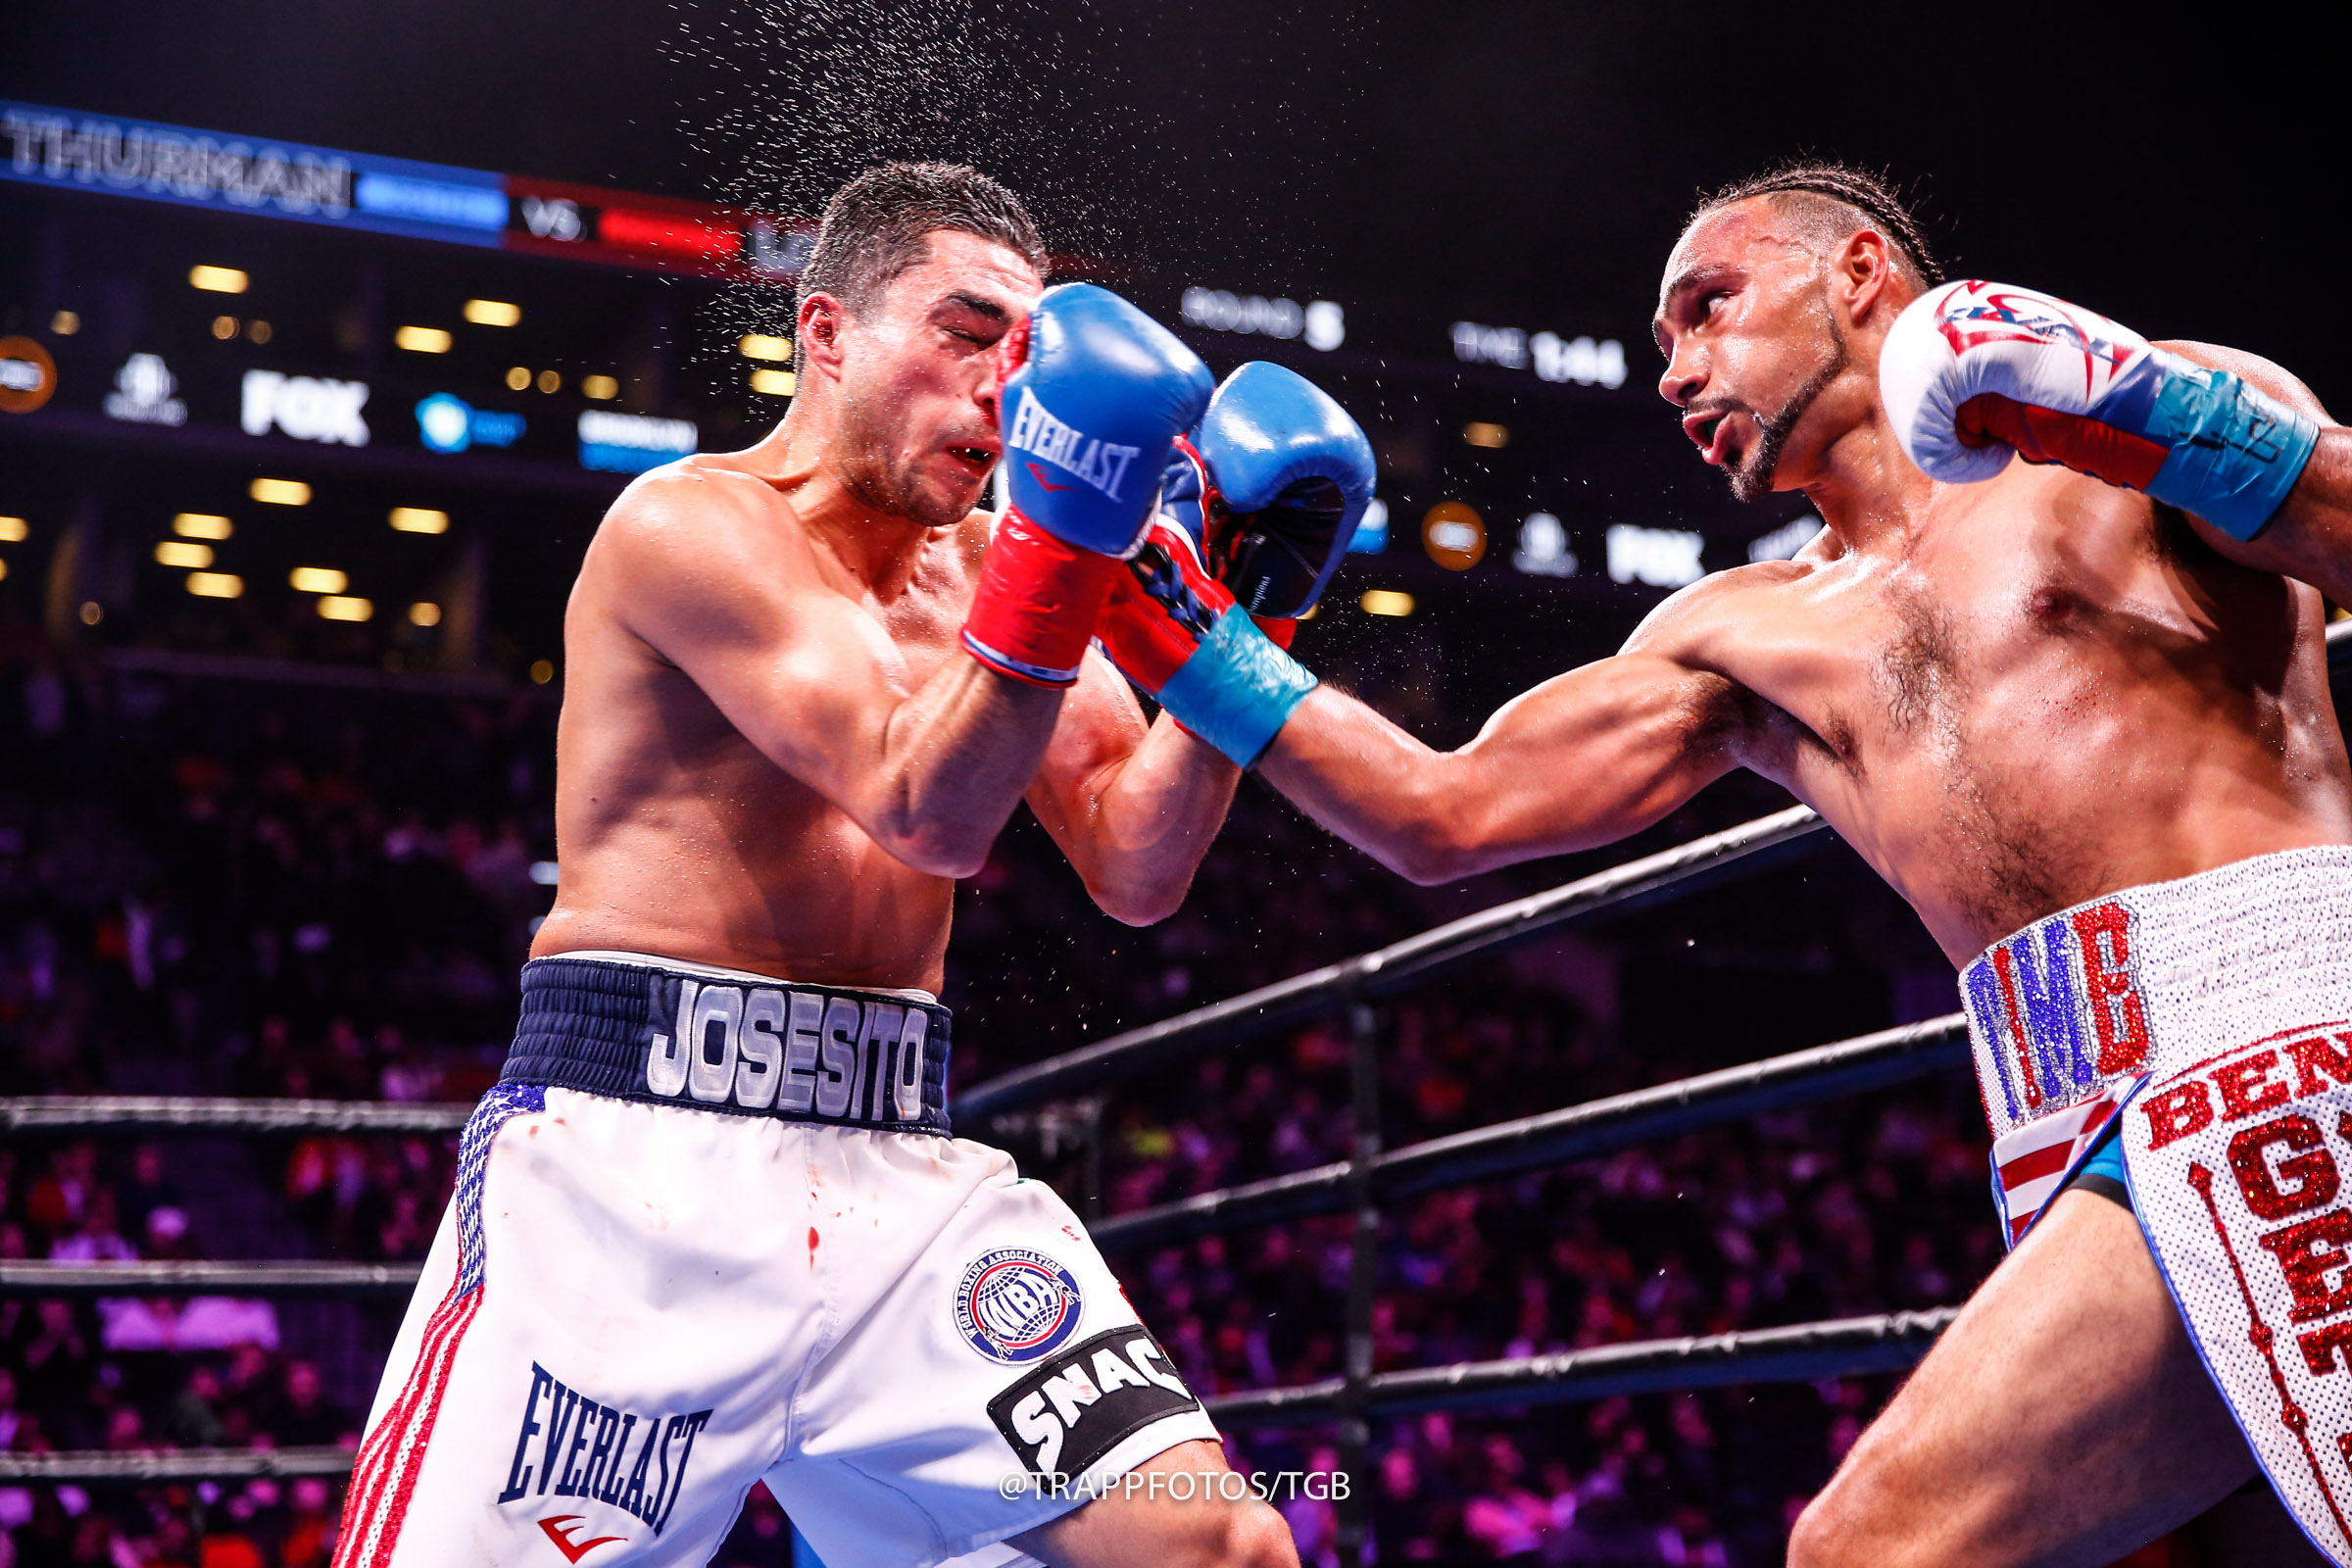 Josesito Lopez (left) gave Keith Thurman hell during the second half of their WBA welterweight title bout but the defending beltholder dished out his share of punishment. Photo by Stephanie Trapp/TGB Promotions